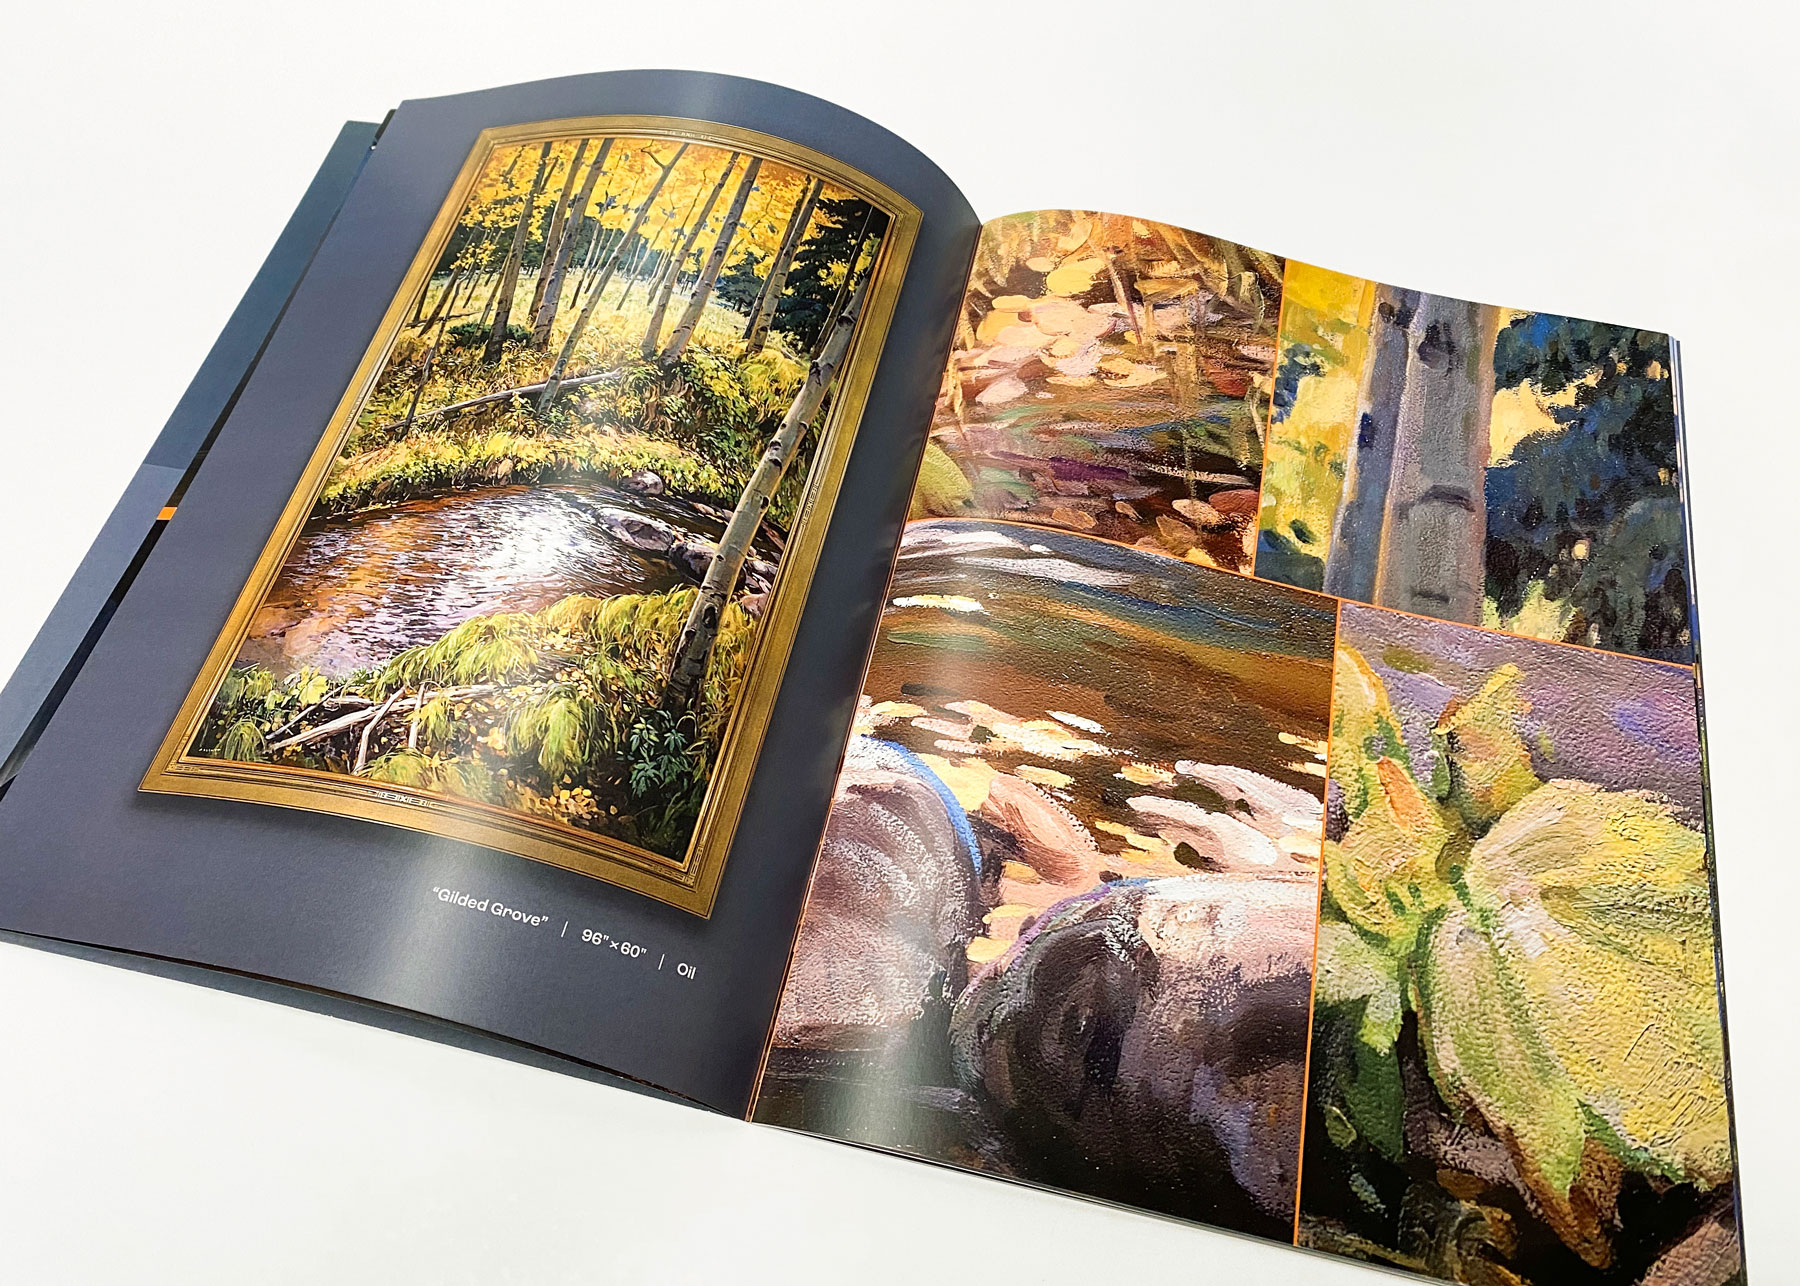 A spread featuring 'Gilded Grove' with detail shots.